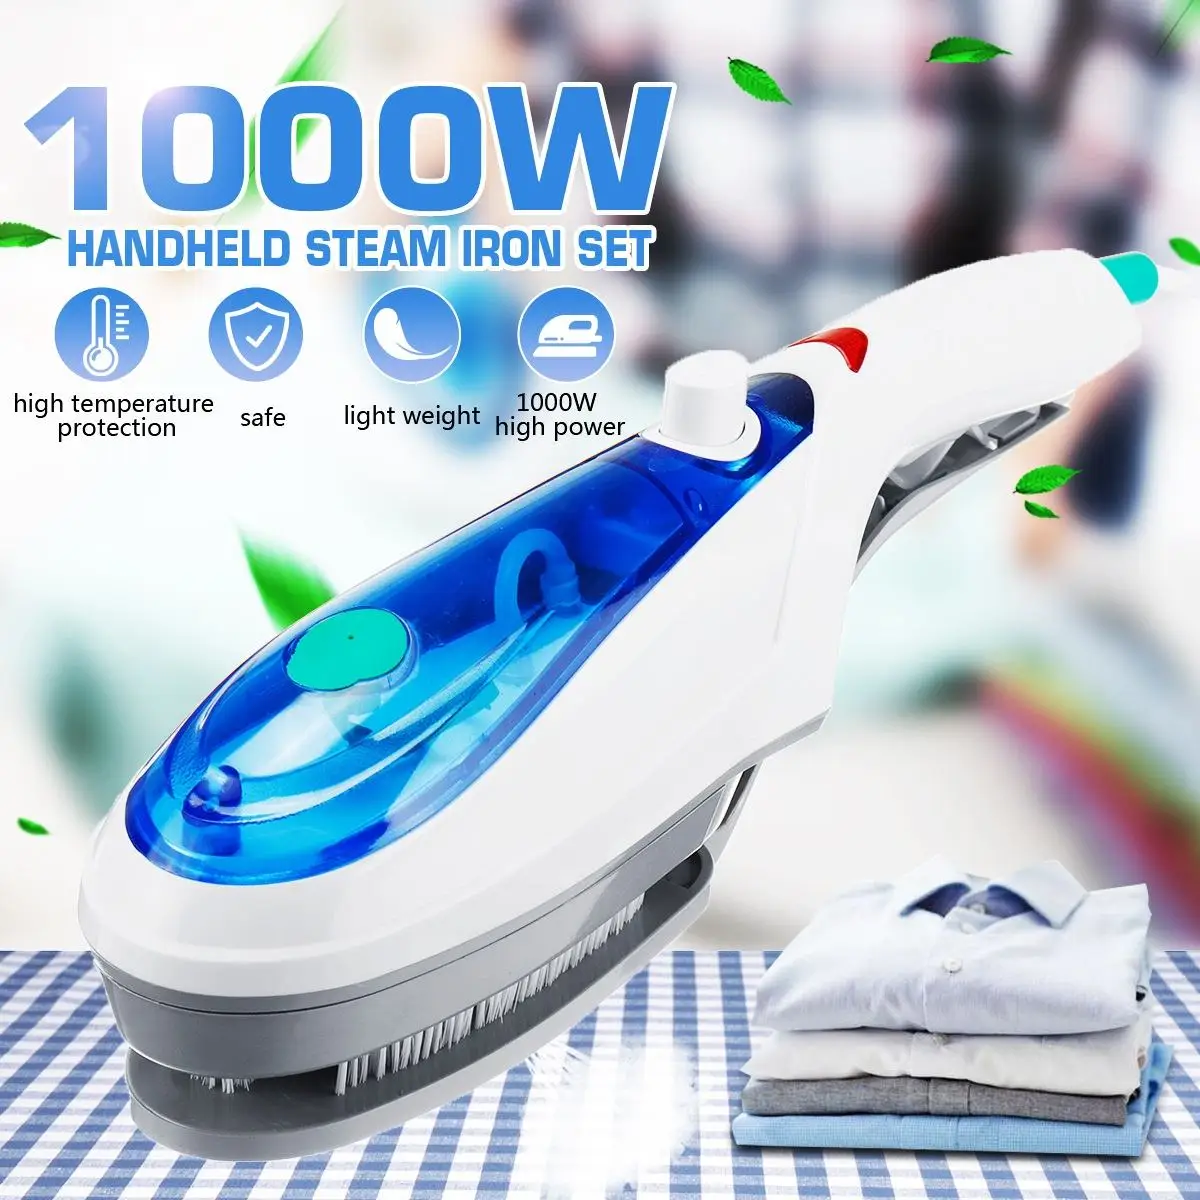 Details about   1000W Portable Travel Handheld Iron Clothes Steamer Garment Steam Brush  AA 